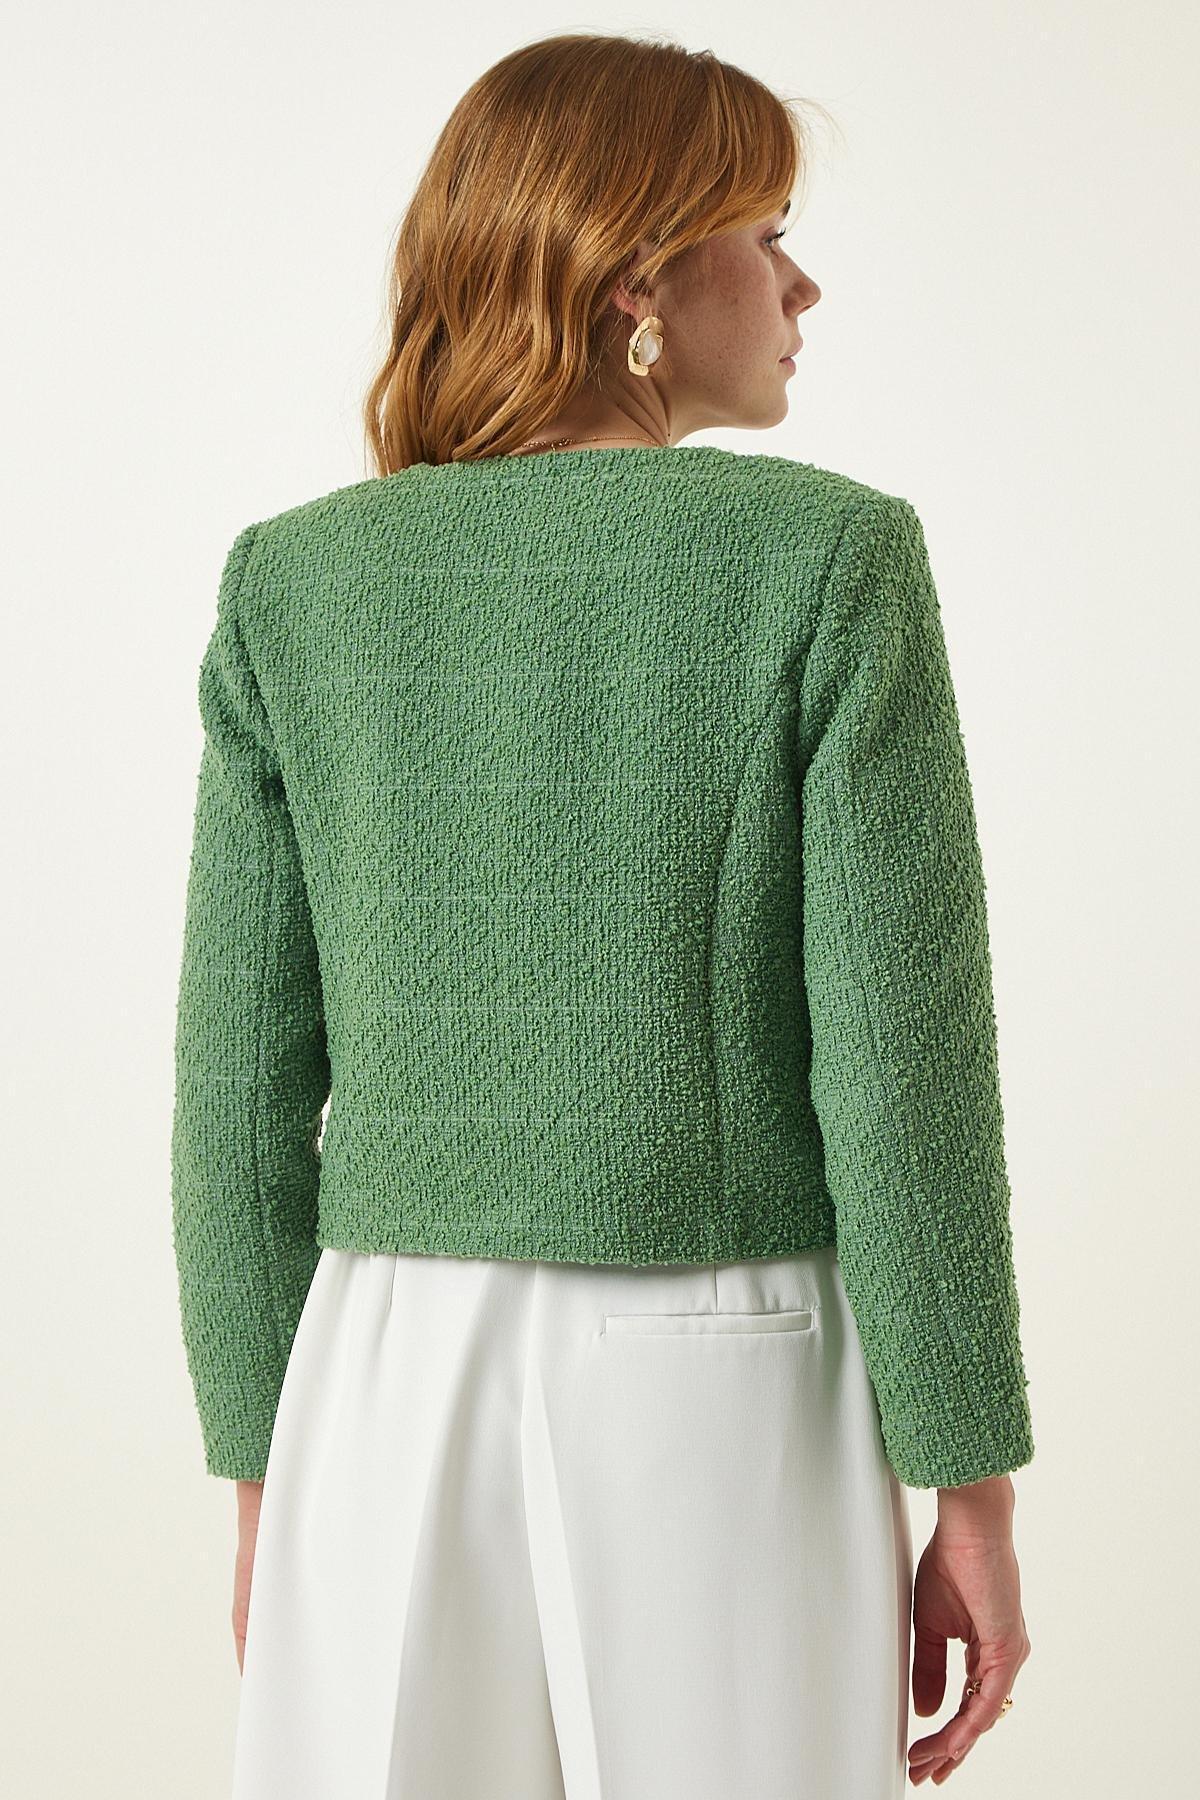 Happiness Istanbul - Green Buttoned Tweed Jacket